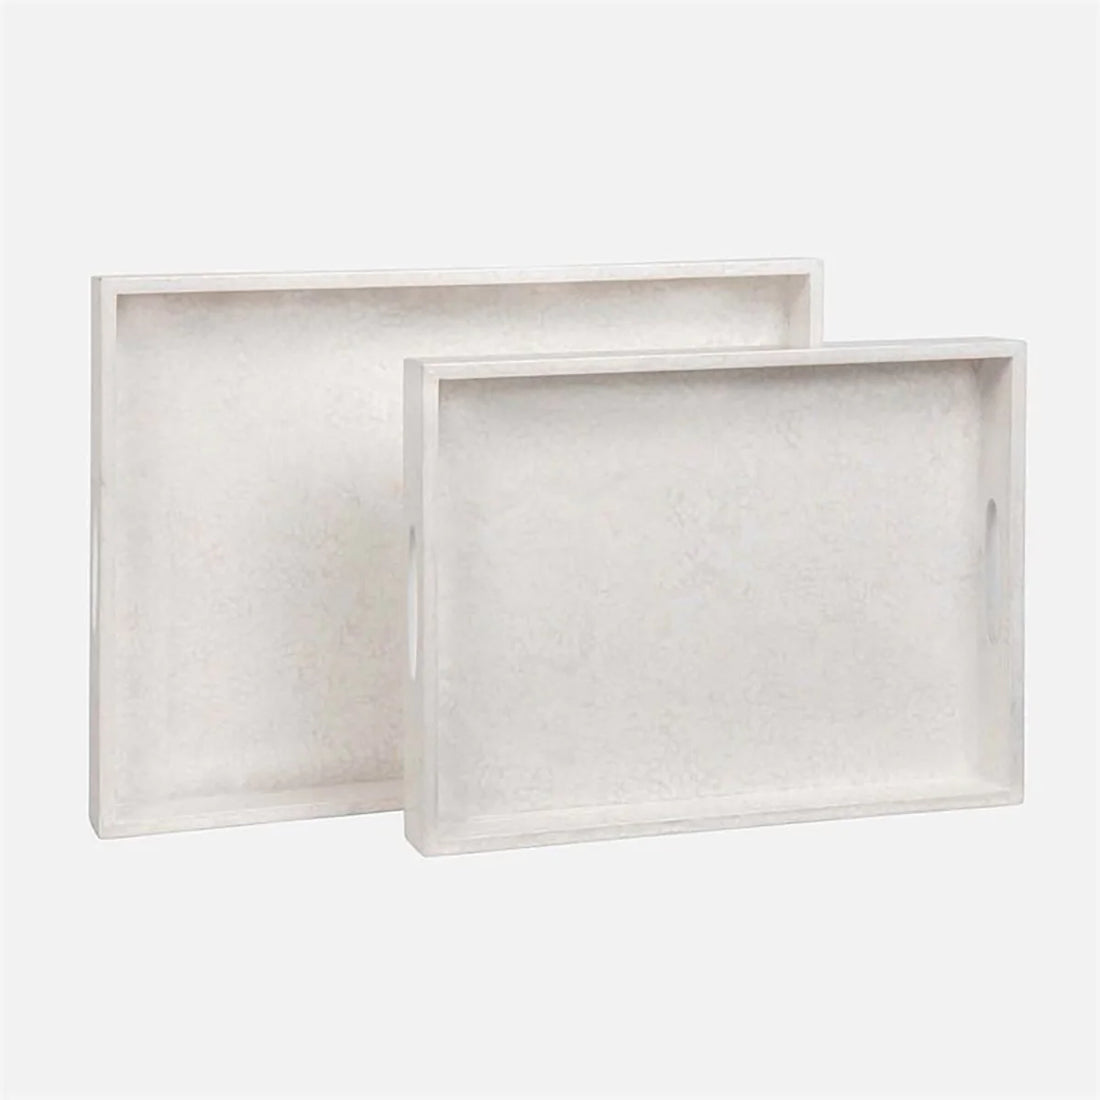 Made Goods Della Lacquered Eggshell Tray, 2-Piece Set